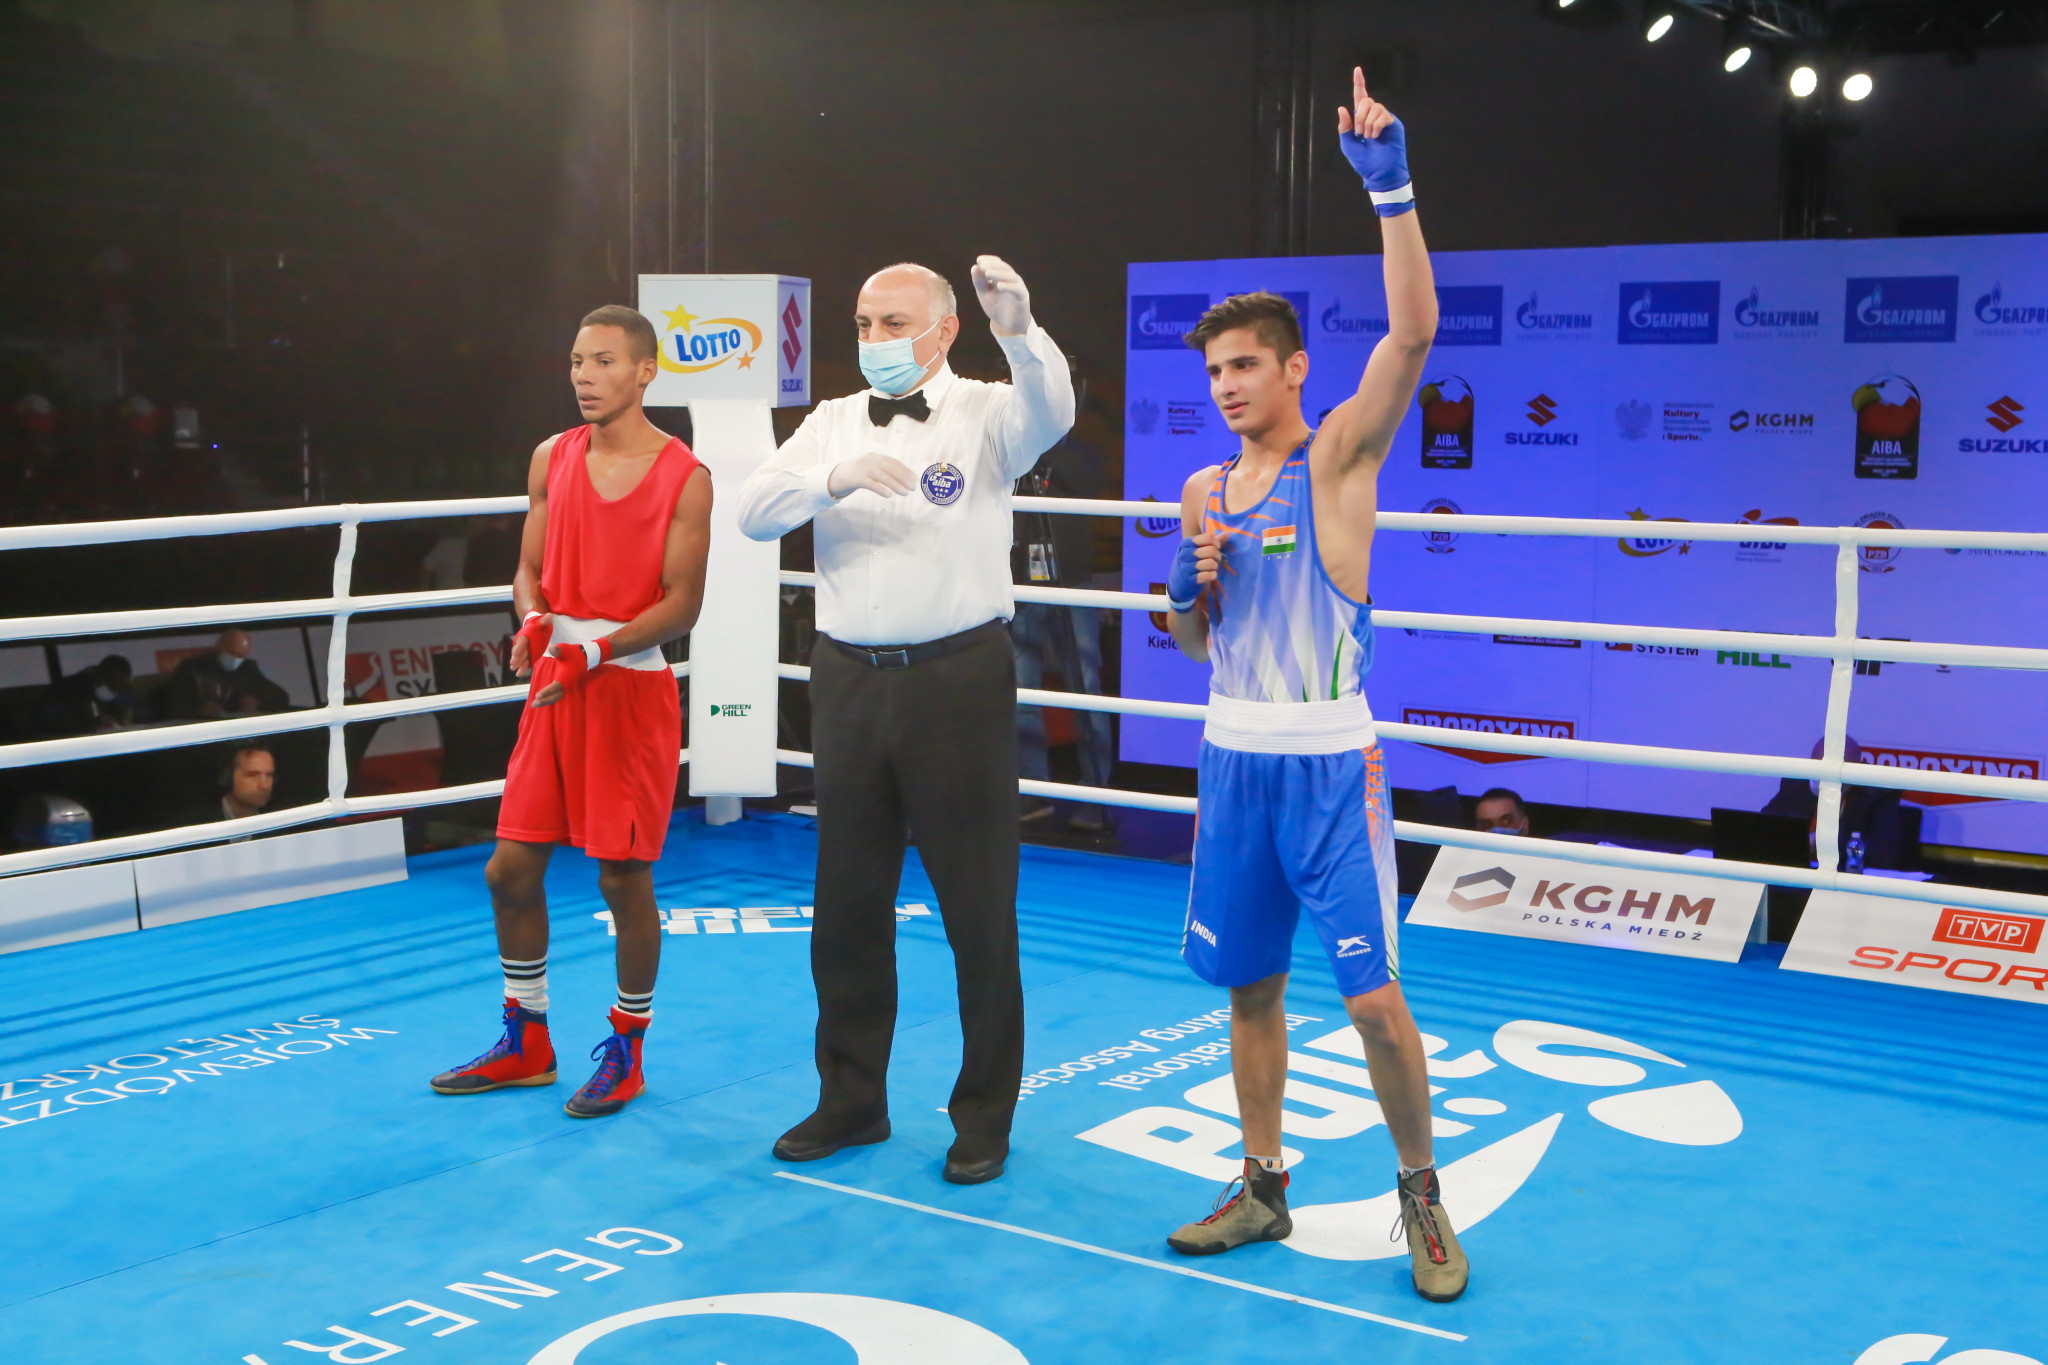 An Indian fighter raises his arm in celebration after winning his bout in Kielce ©AIBA